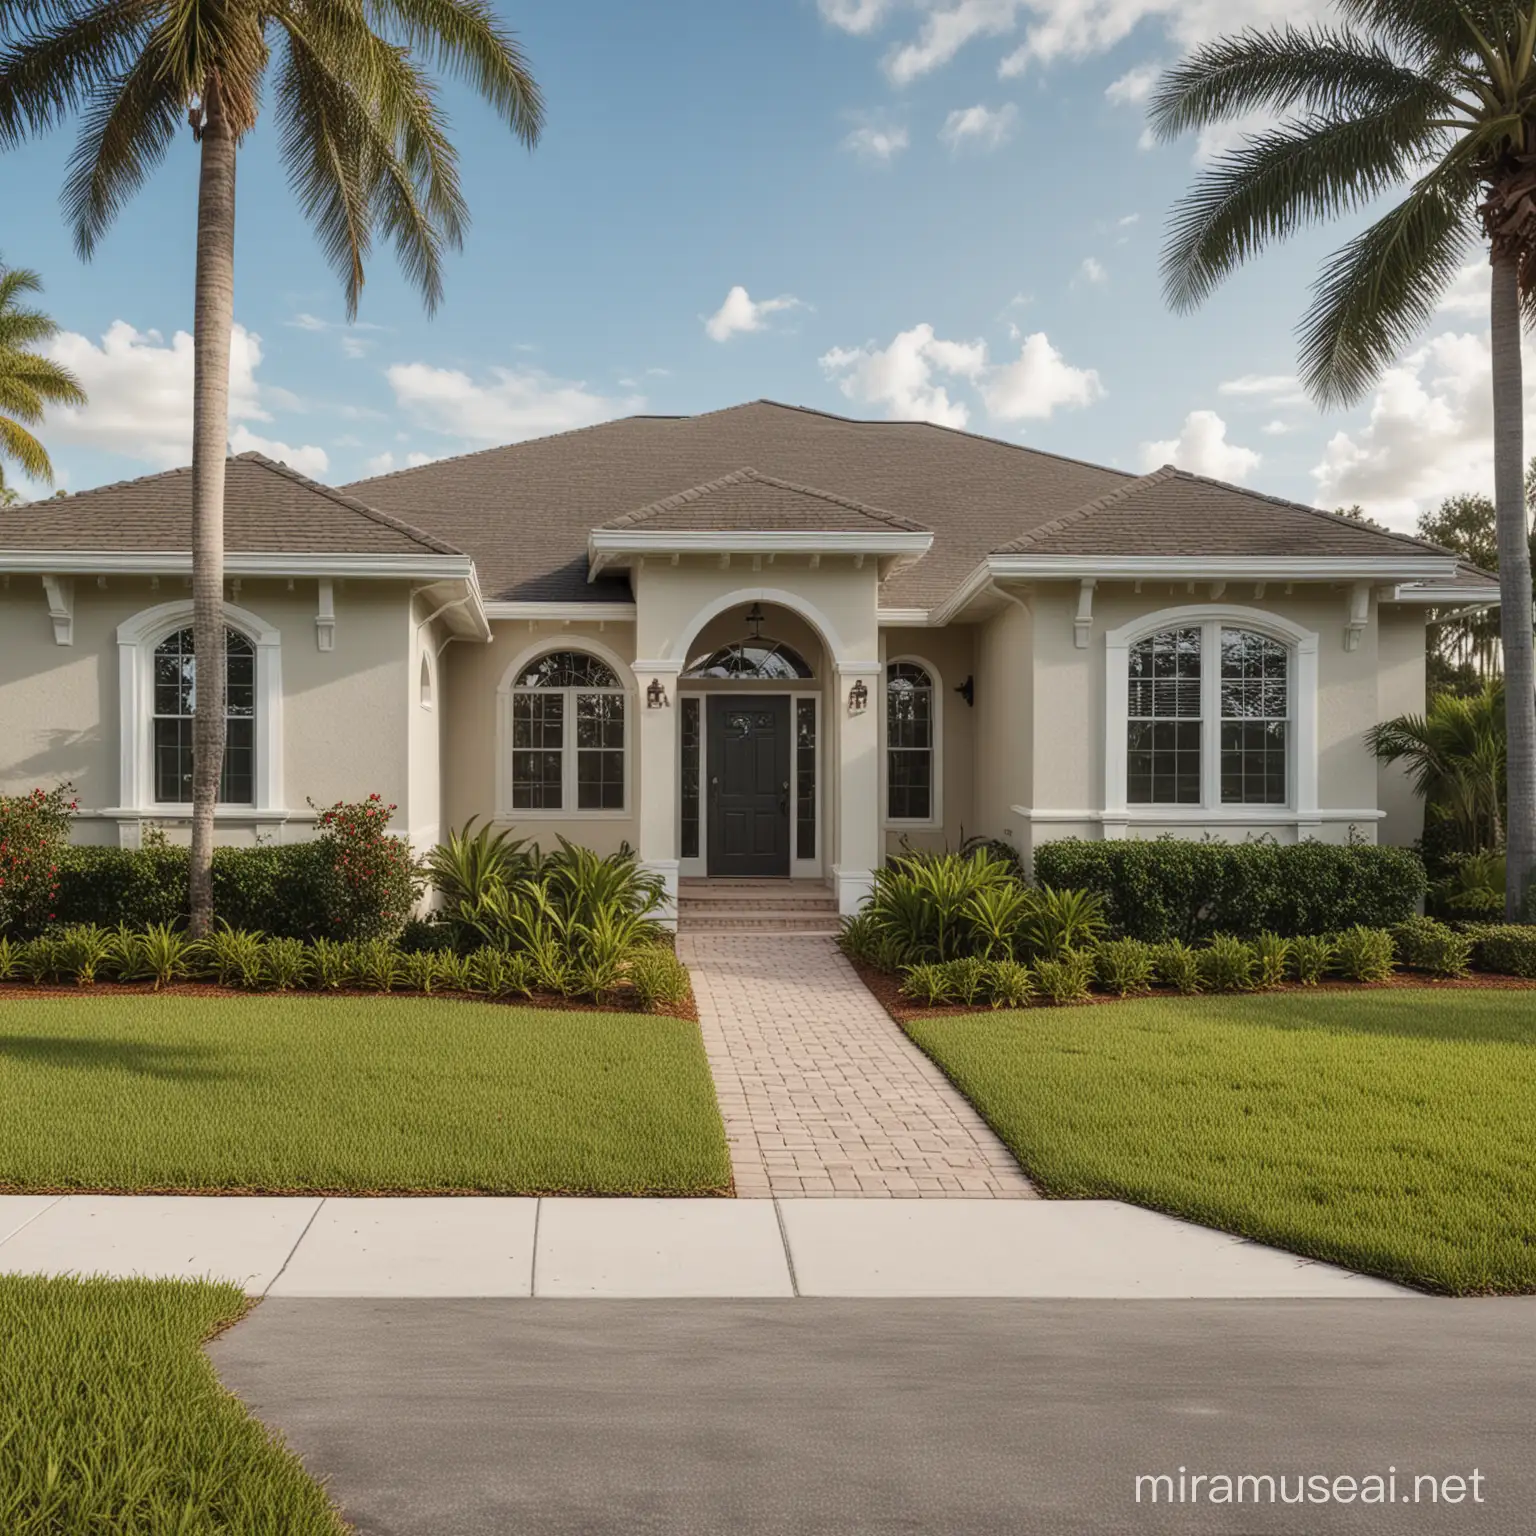 Stunning Florida Home for Sale Tranquil Oasis with Palms and Pool